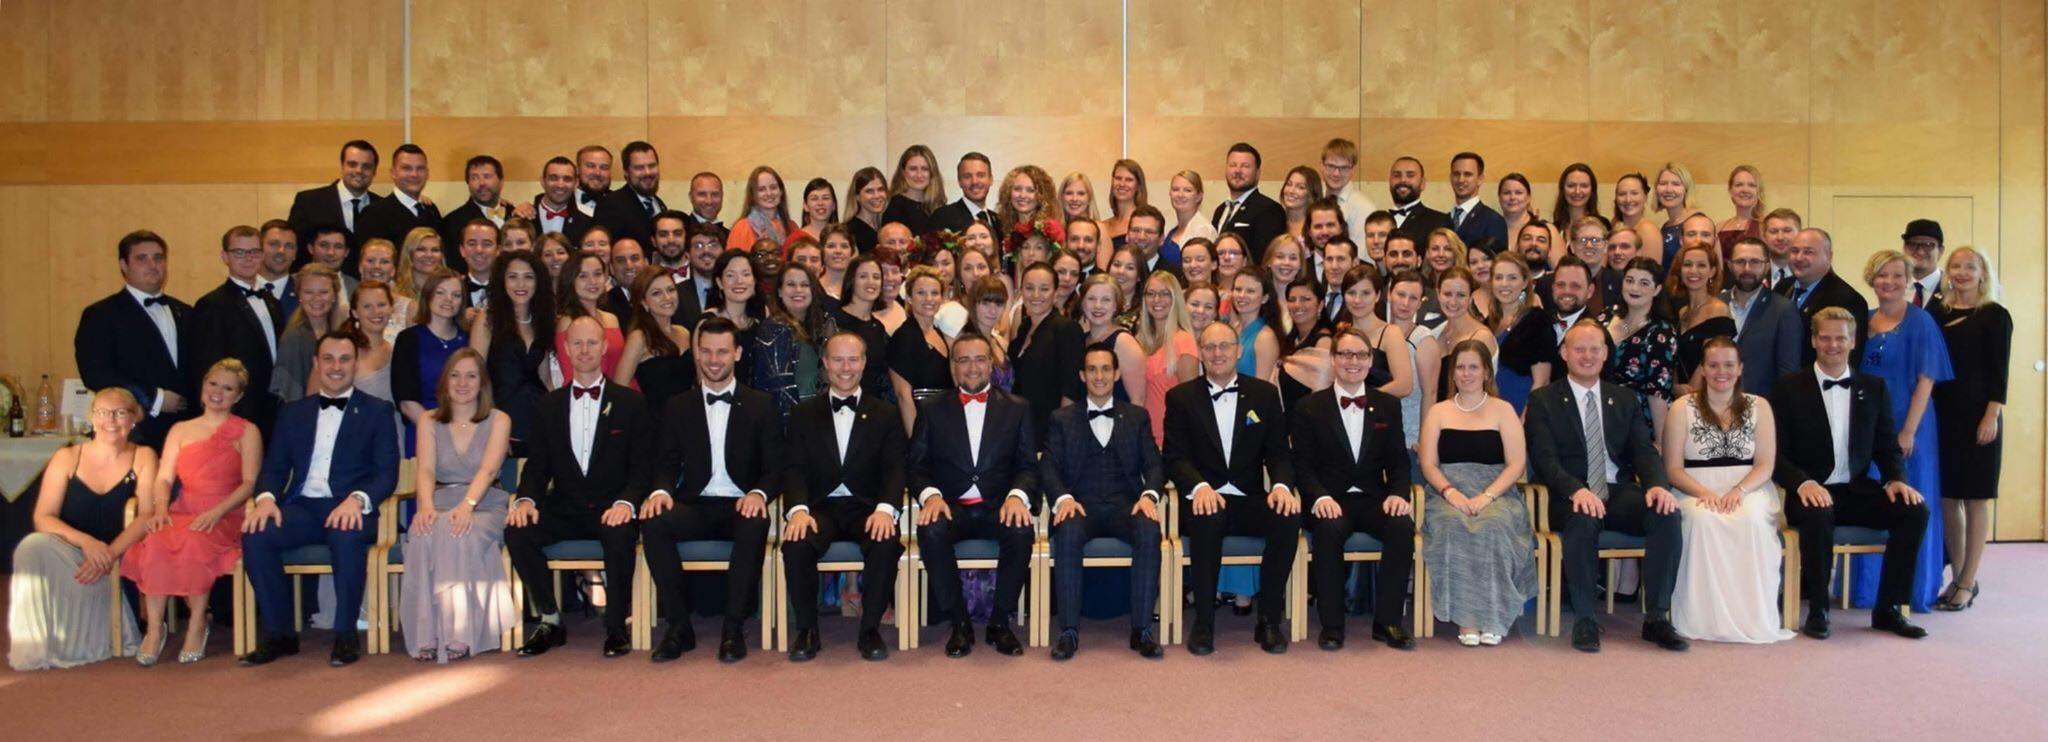 JCI European Academy 2019 - Apply for your place now!